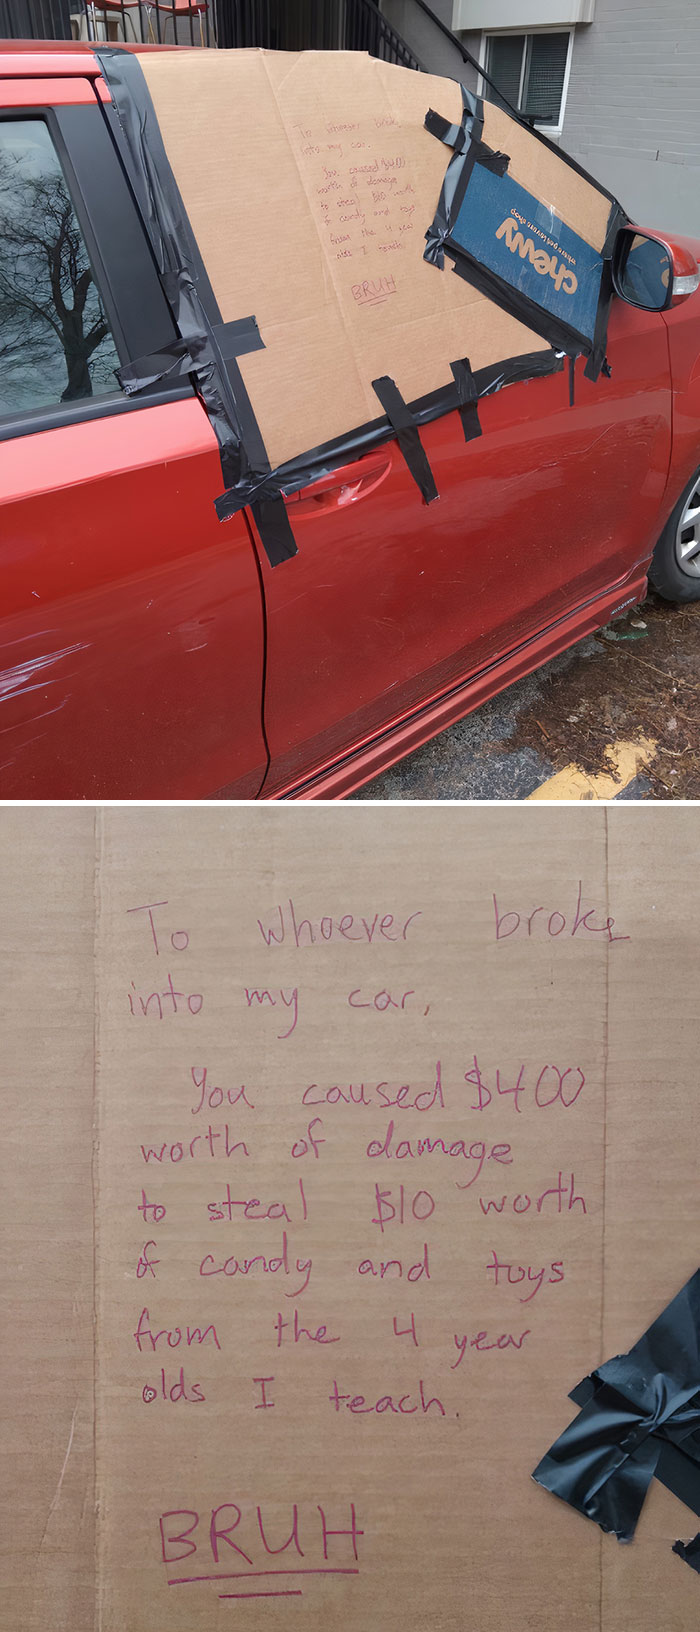 Someone Broke Into My Car To Steal 10 Dollars Worth Of Candy And Toys I Bought To Give To My 4-Year-Old Students